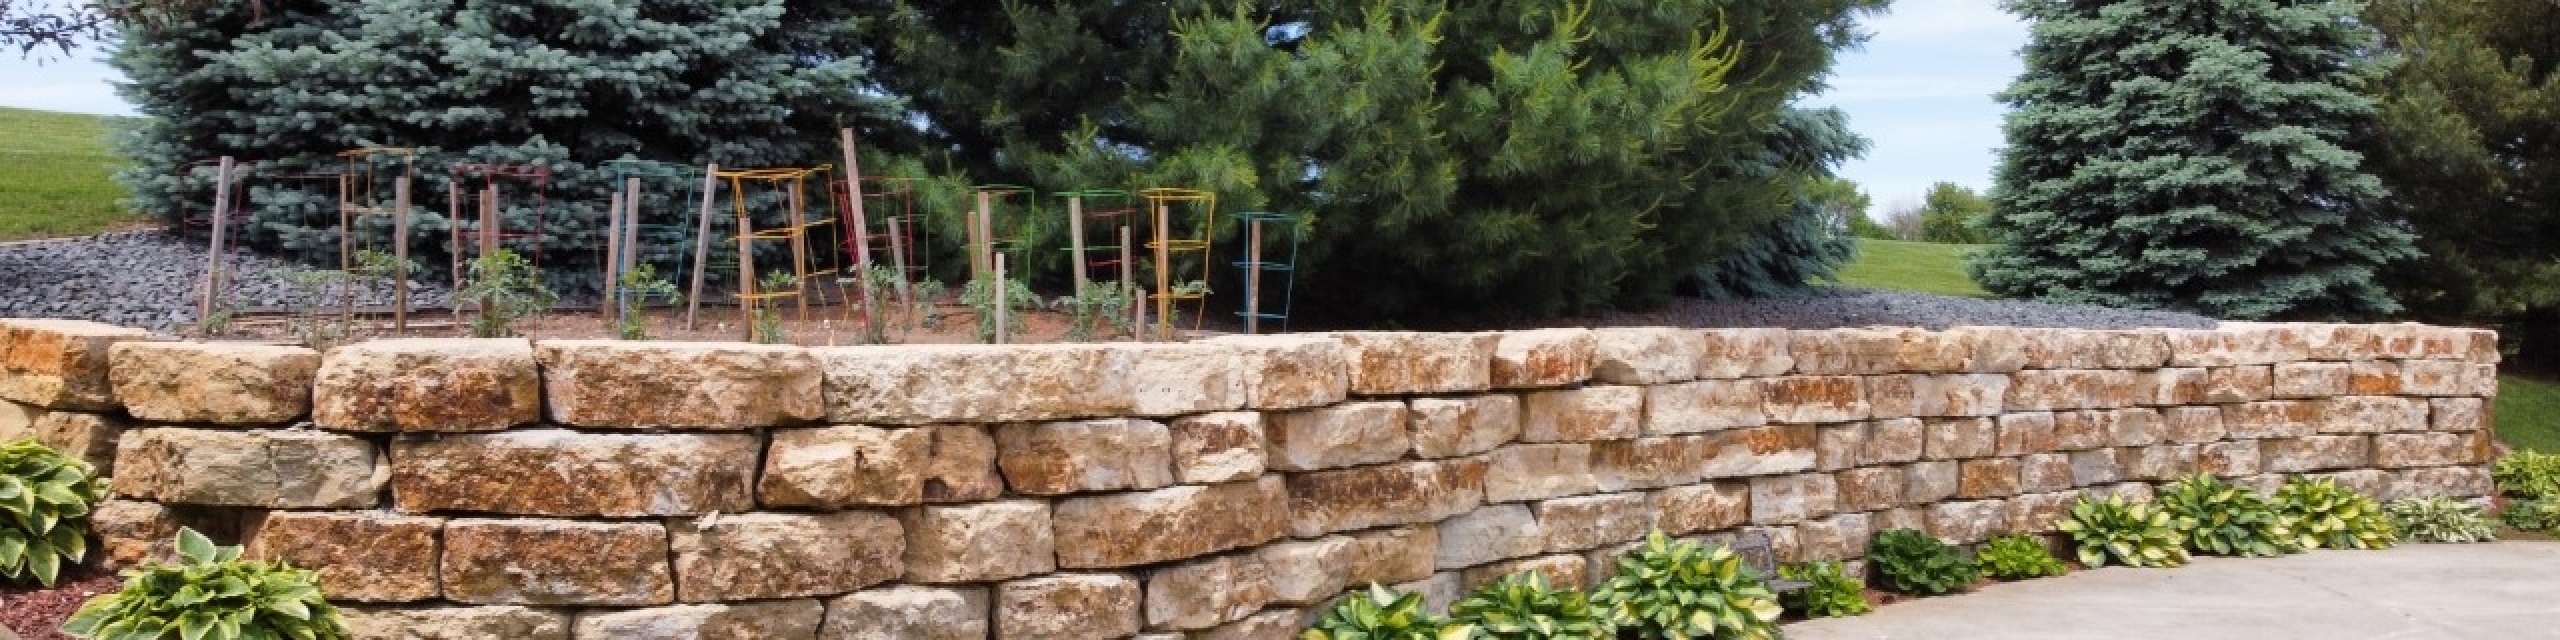 Brick boulder retaining wall made with tan bricks and surrounded by dark red mulch with plants planted in regular intervals.